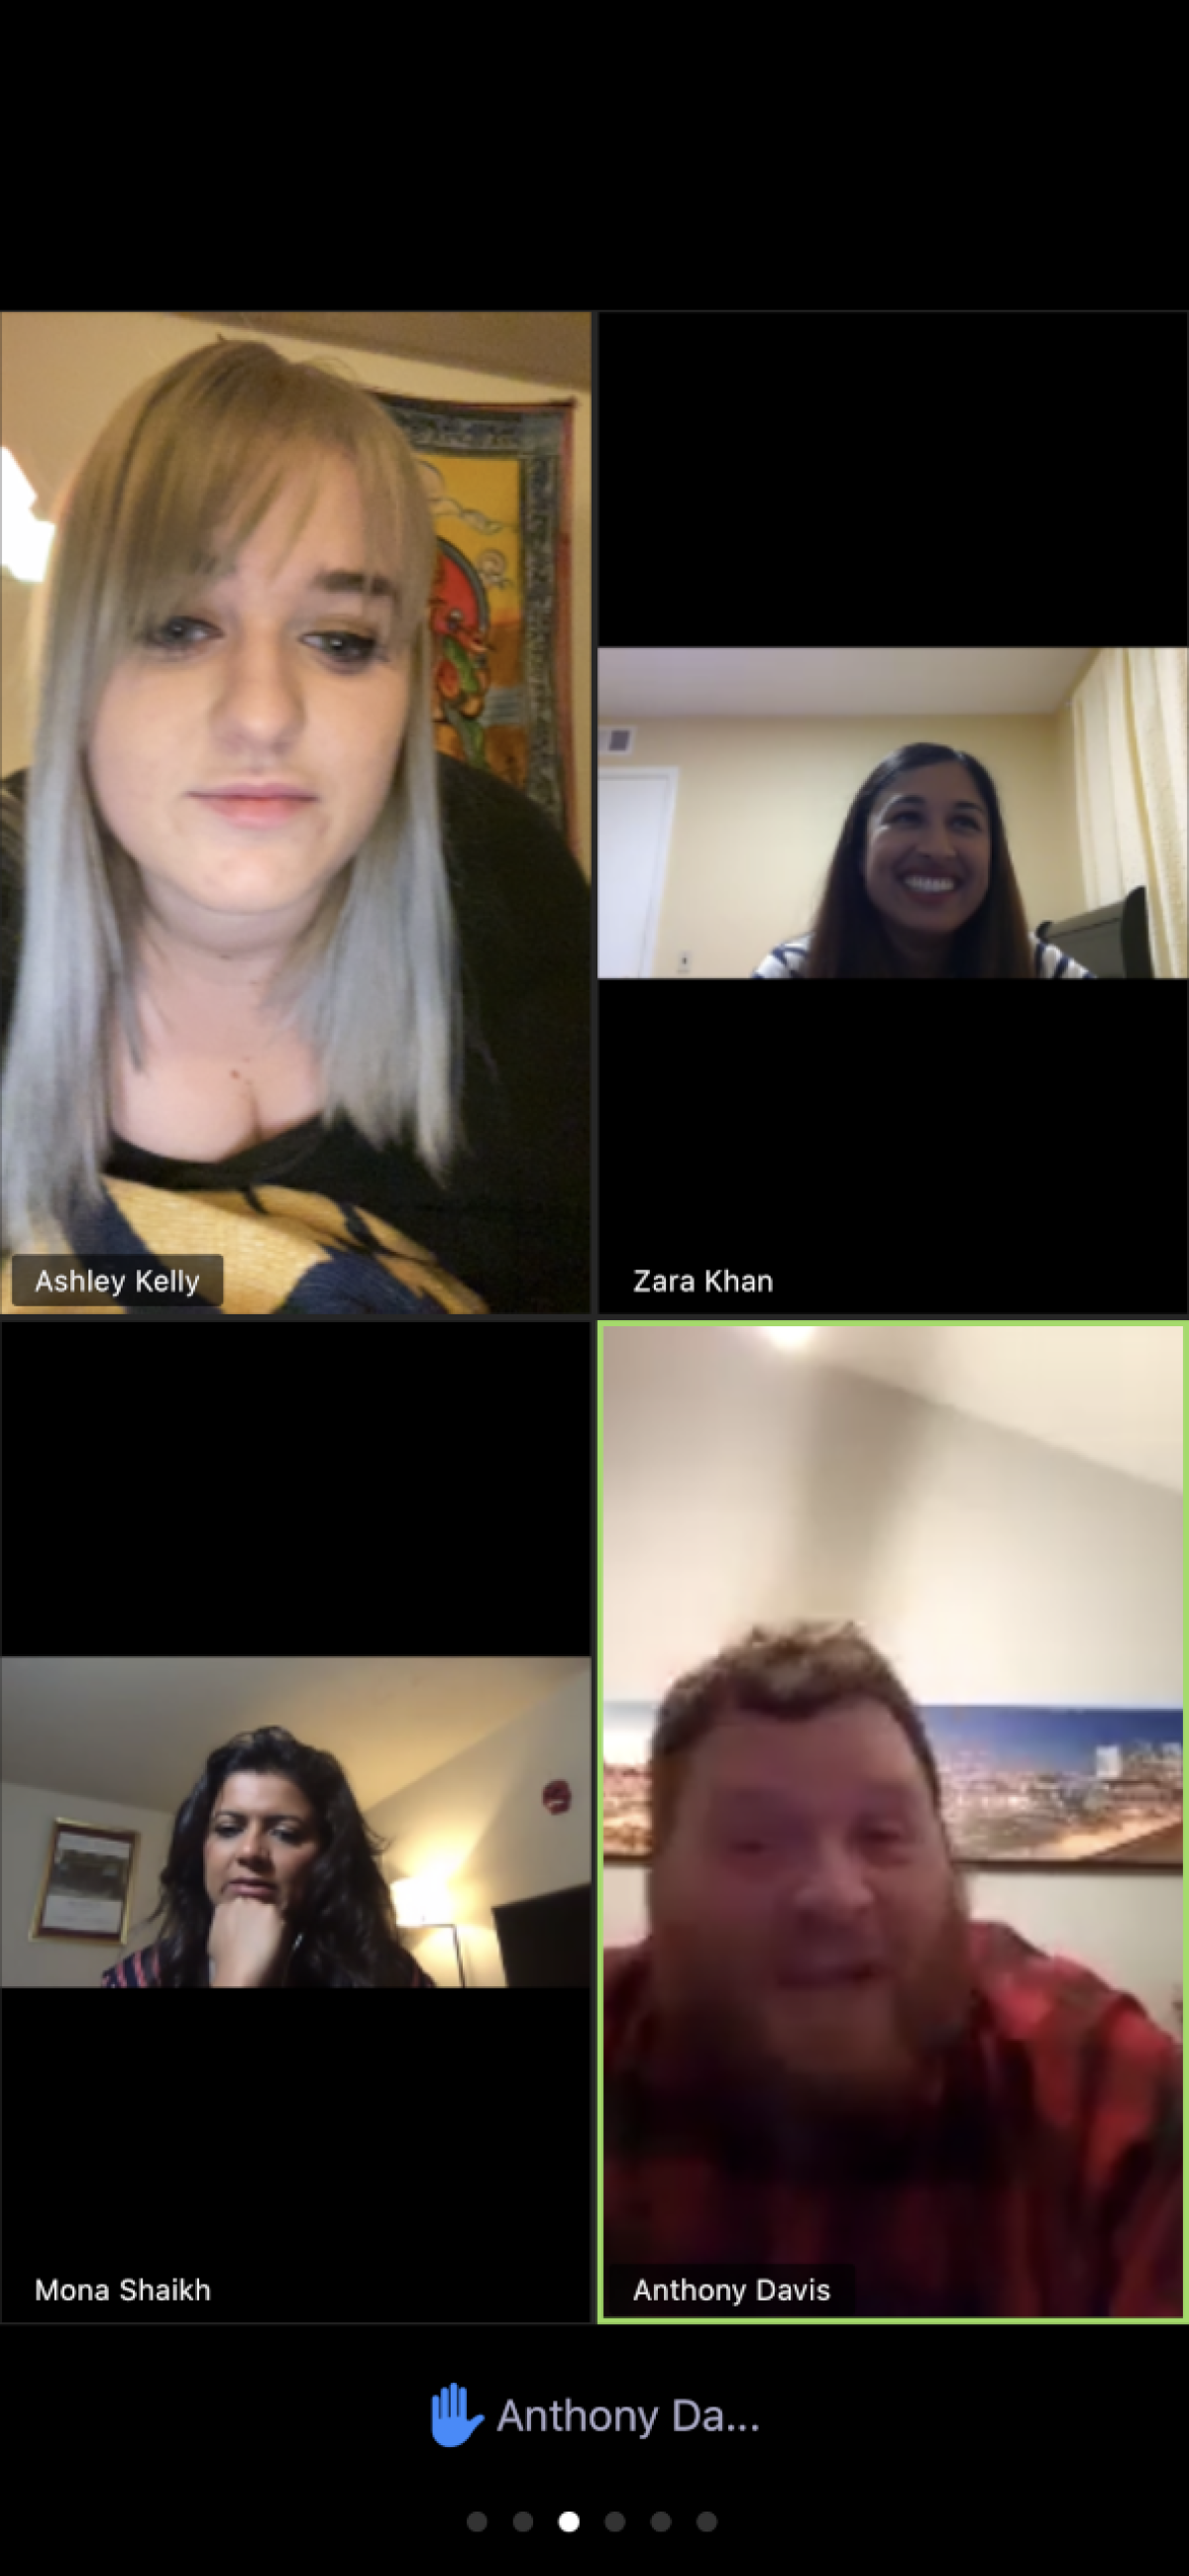 A screenshot from Ashley Kelly's Zoom as she participates in the "Combating Coronavirus" comedy livestream hosted by Zara Khan on March 20.